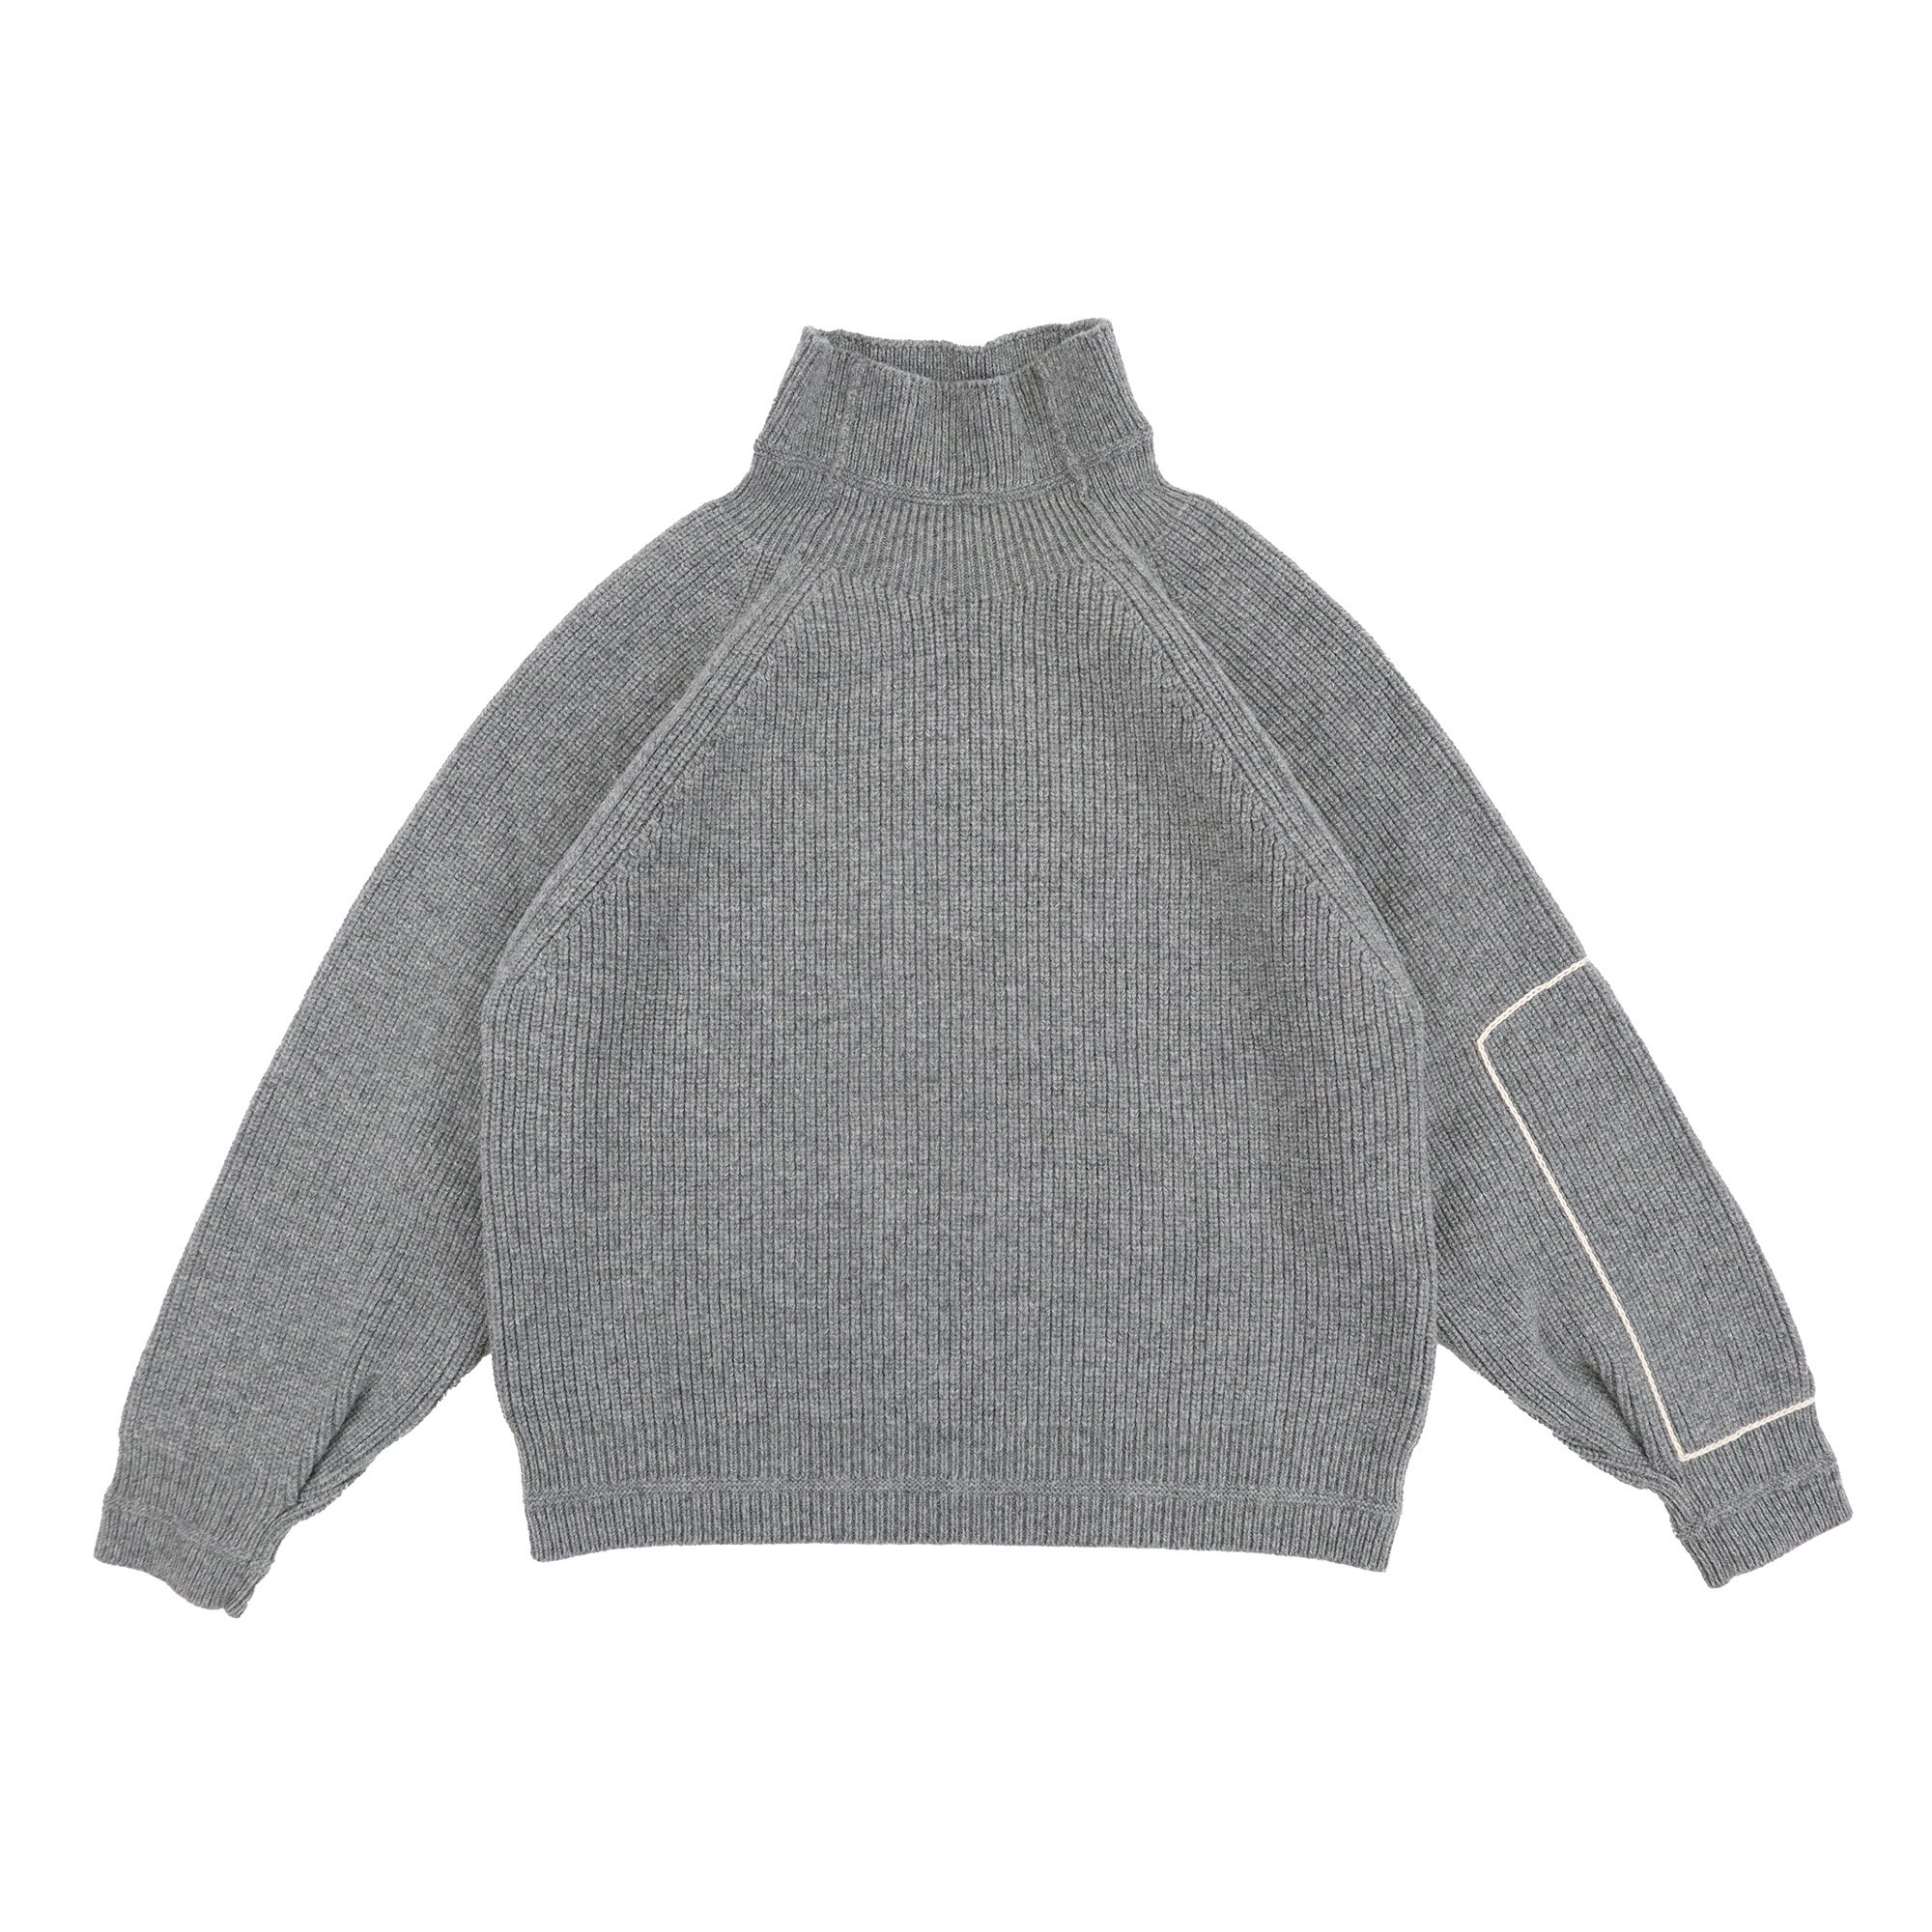 <img class='new_mark_img1' src='https://img.shop-pro.jp/img/new/icons47.gif' style='border:none;display:inline;margin:0px;padding:0px;width:auto;' />VICTORIA BECKHAM KNIT PULLOVERGRAY